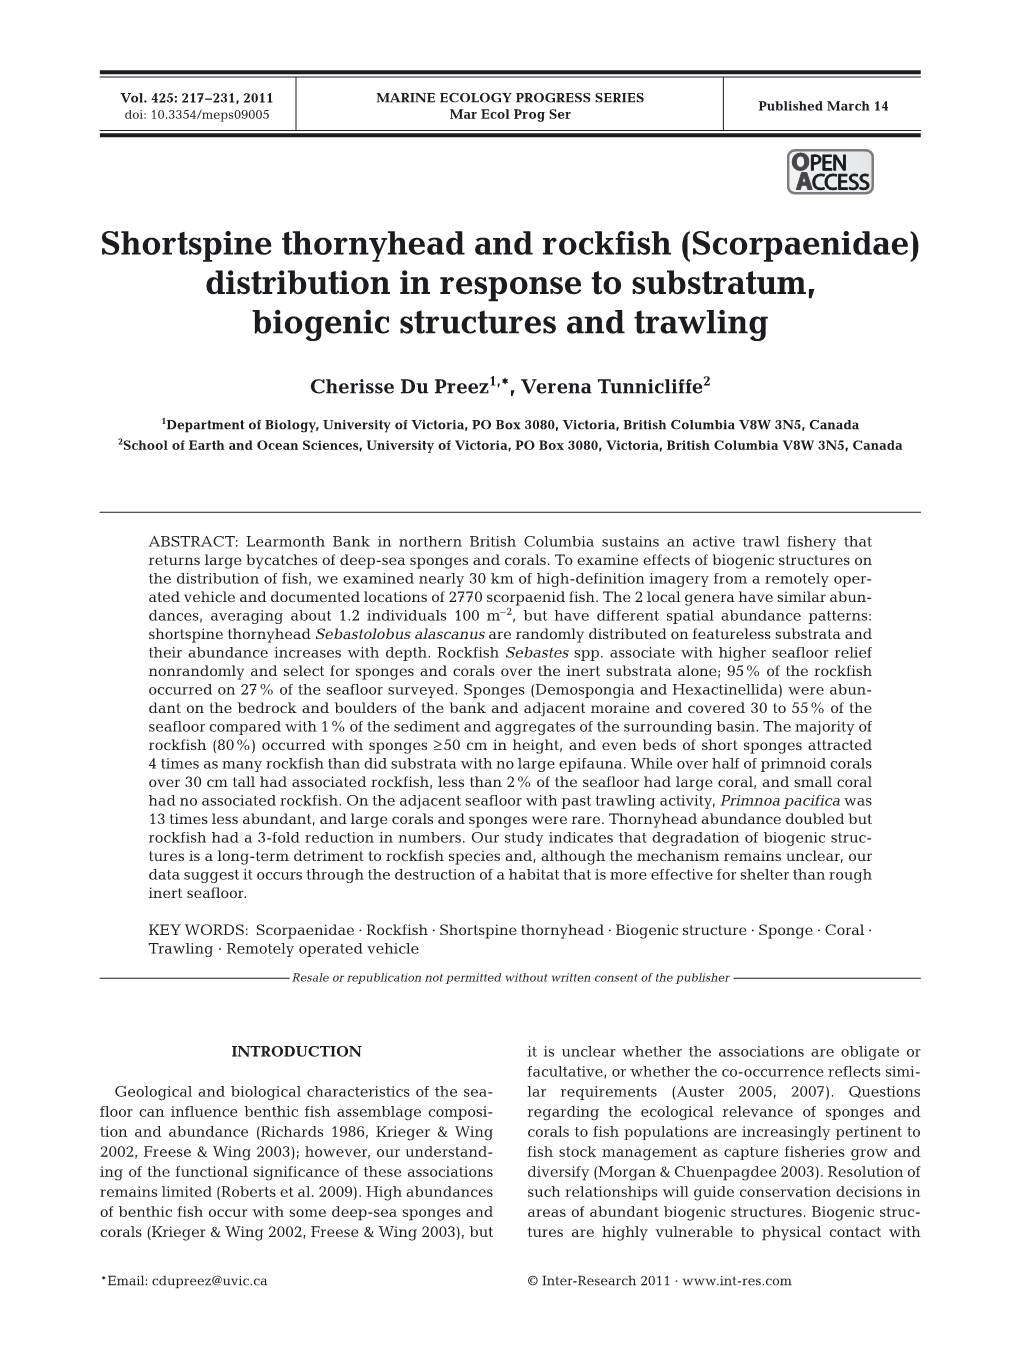 Shortspine Thornyhead and Rockfish (Scorpaenidae) Distribution in Response to Substratum, Biogenic Structures and Trawling